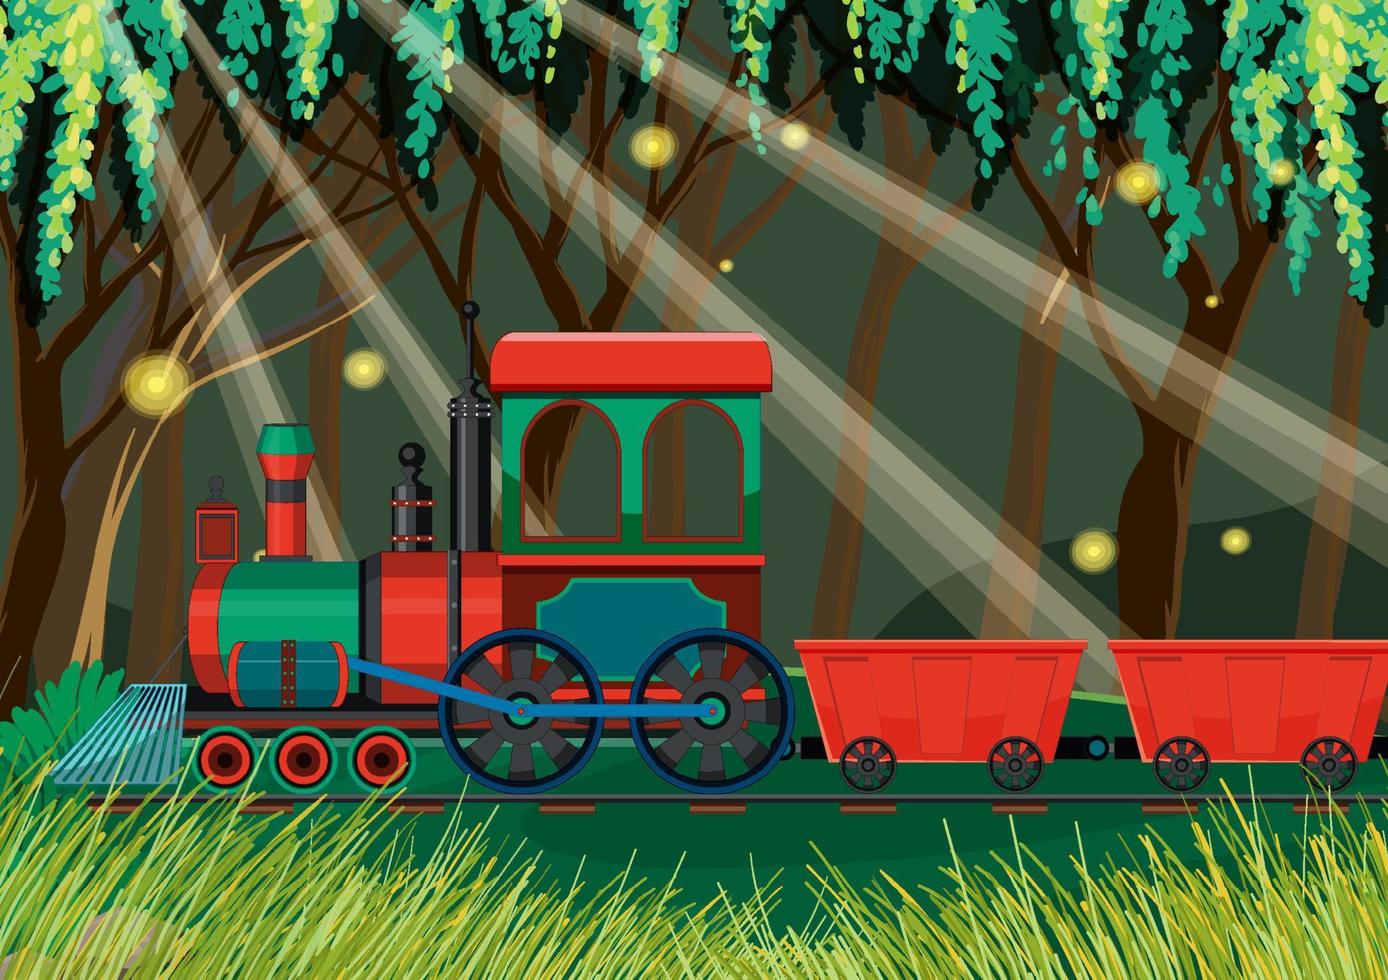 Train with natural scene vector